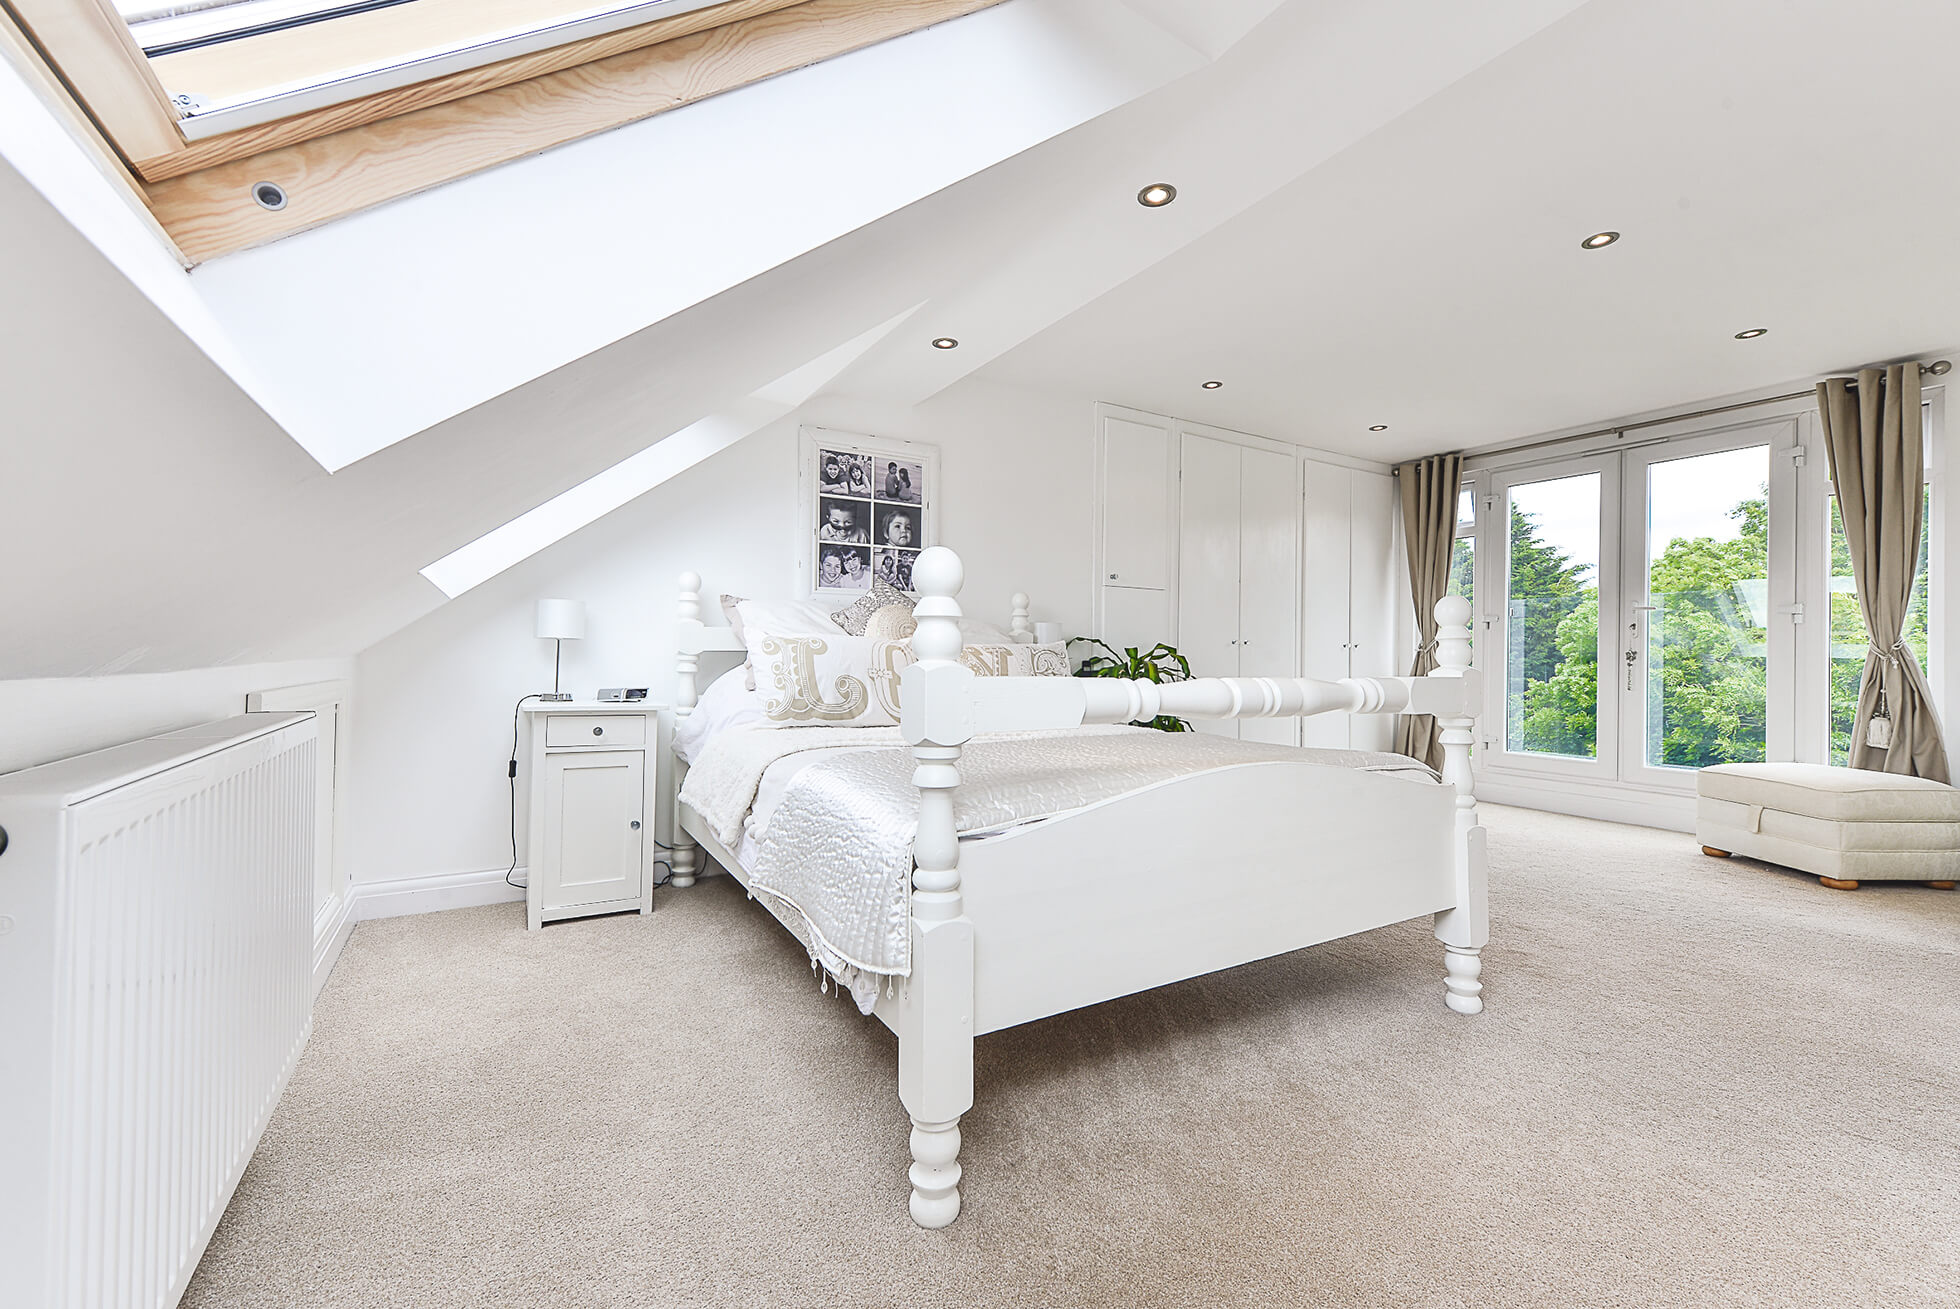 Do you have a question about converting your Loft in Shenley? Here are the most popular questions asked by our clients.